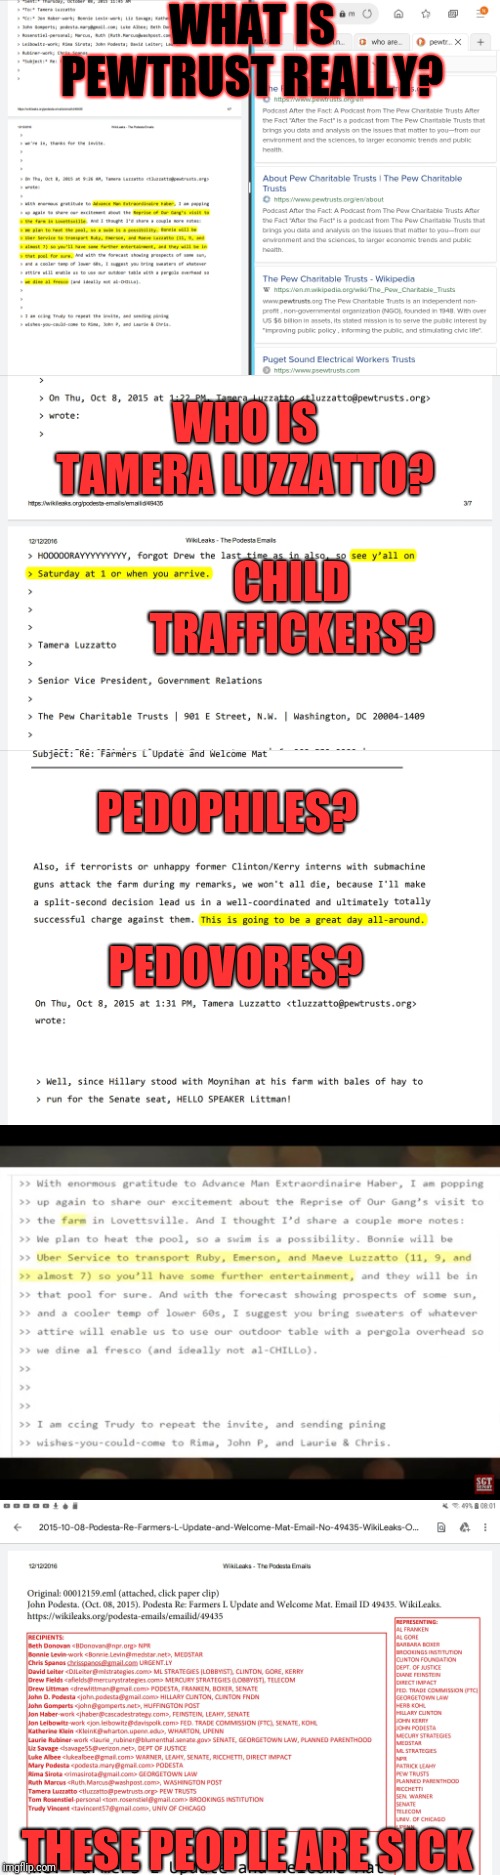 Is/was $6 billion PewTrust run by child traffickers, pedophiles, pedovores? | WHAT IS PEWTRUST REALLY? WHO IS TAMERA LUZZATTO? CHILD TRAFFICKERS? PEDOPHILES? PEDOVORES? THESE PEOPLE ARE SICK | image tagged in child trafficking,pedophiles,pedovores,john podesta,corruption | made w/ Imgflip meme maker